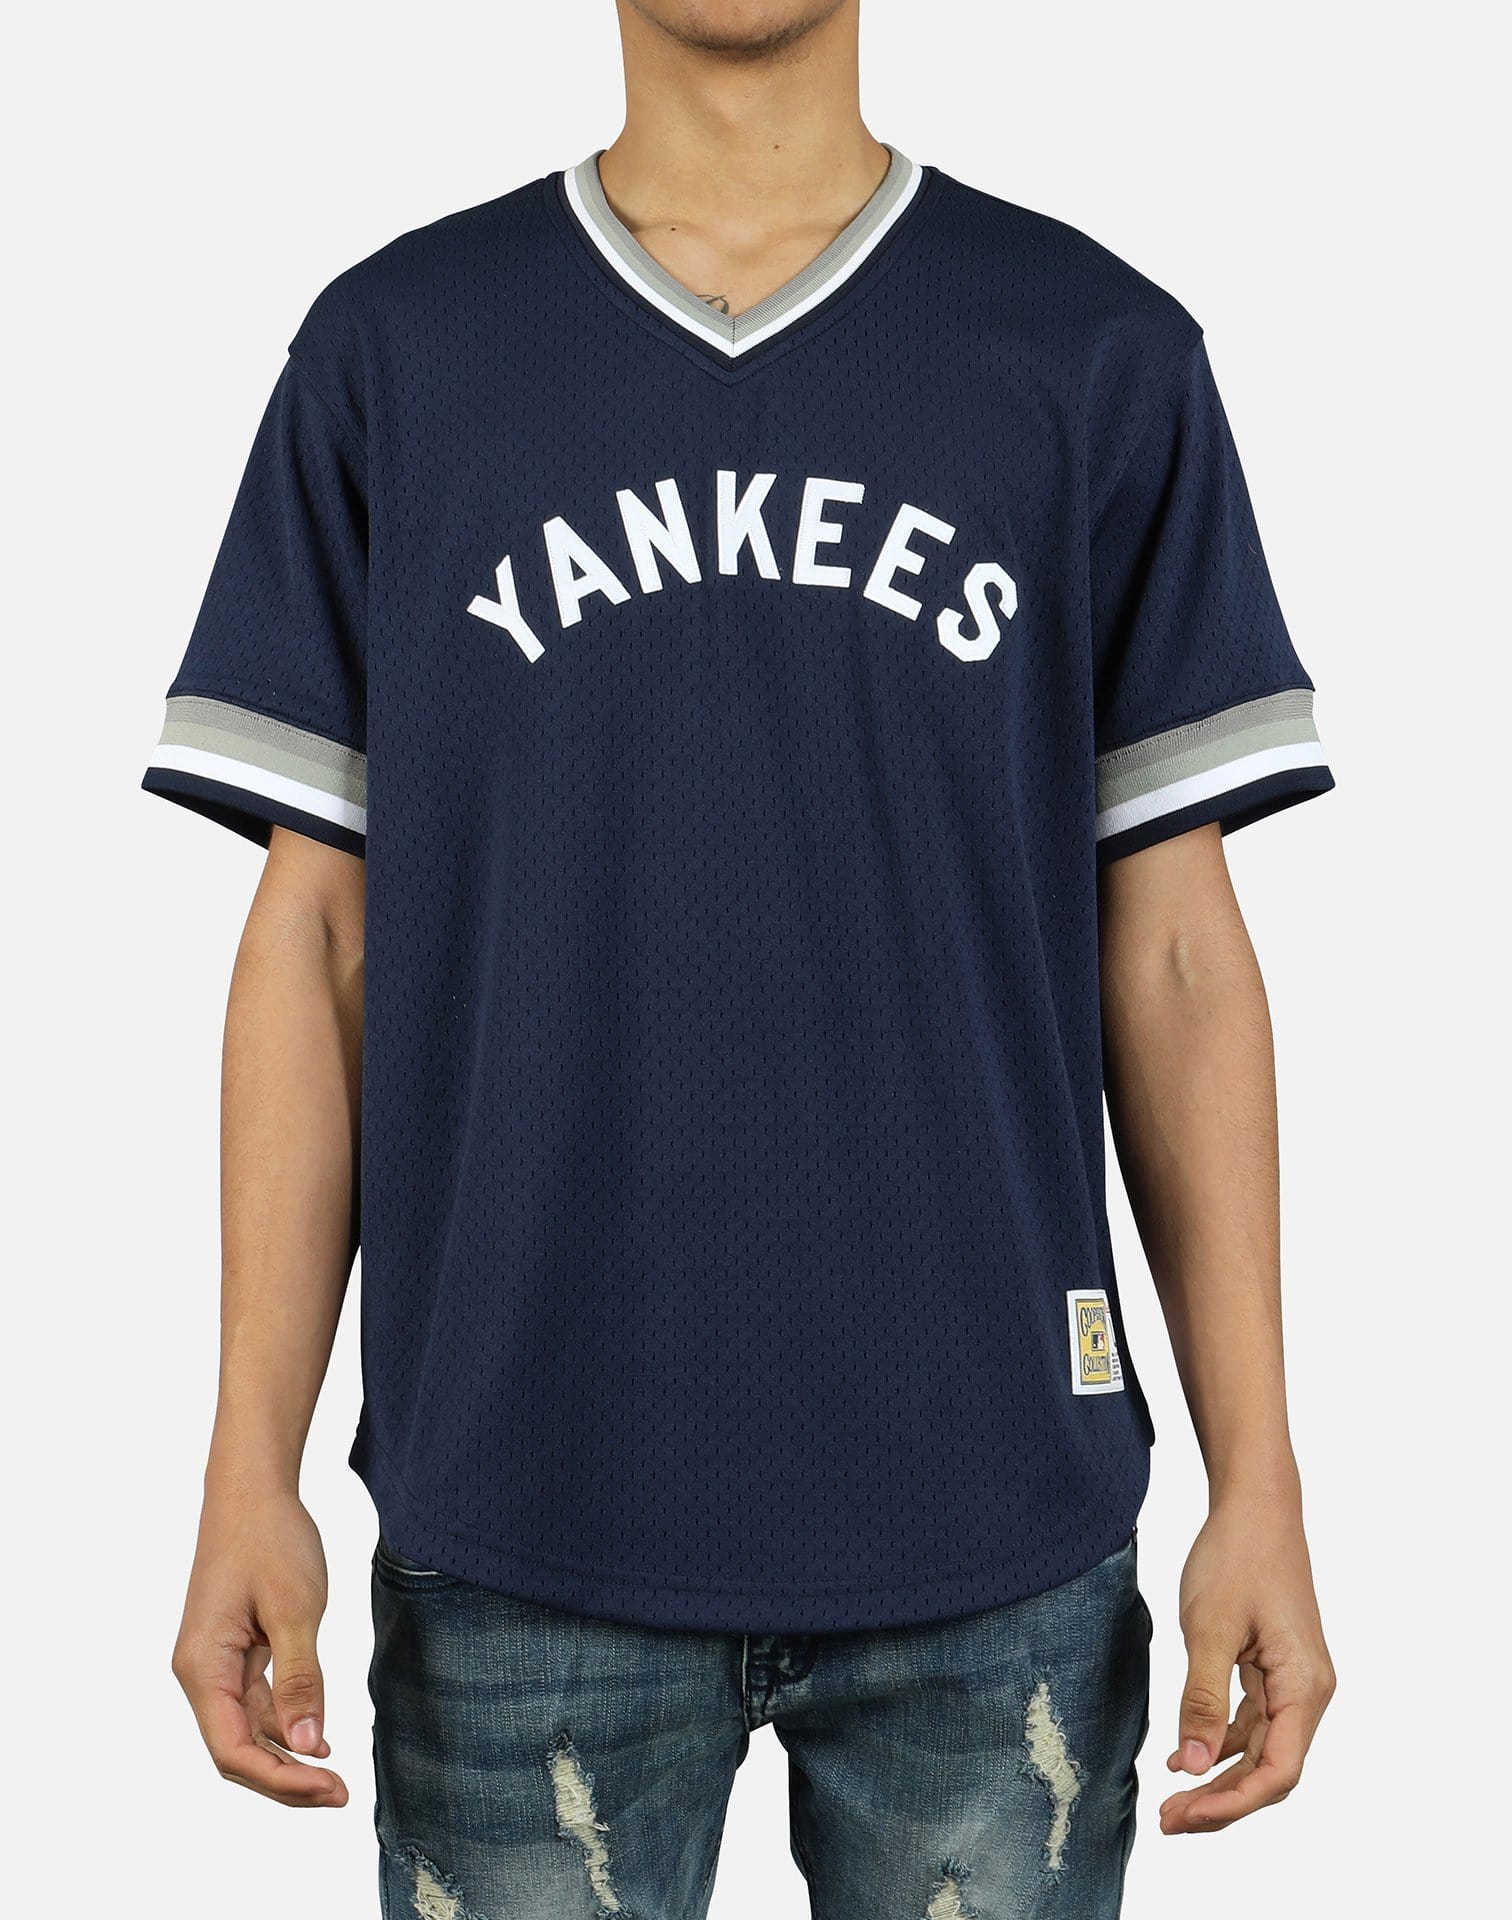 Imo the Yankees should always wear the pinstripes at home, but this navy blue  jersey would make a cool alternative jersey on the road!! : r/NYYankees